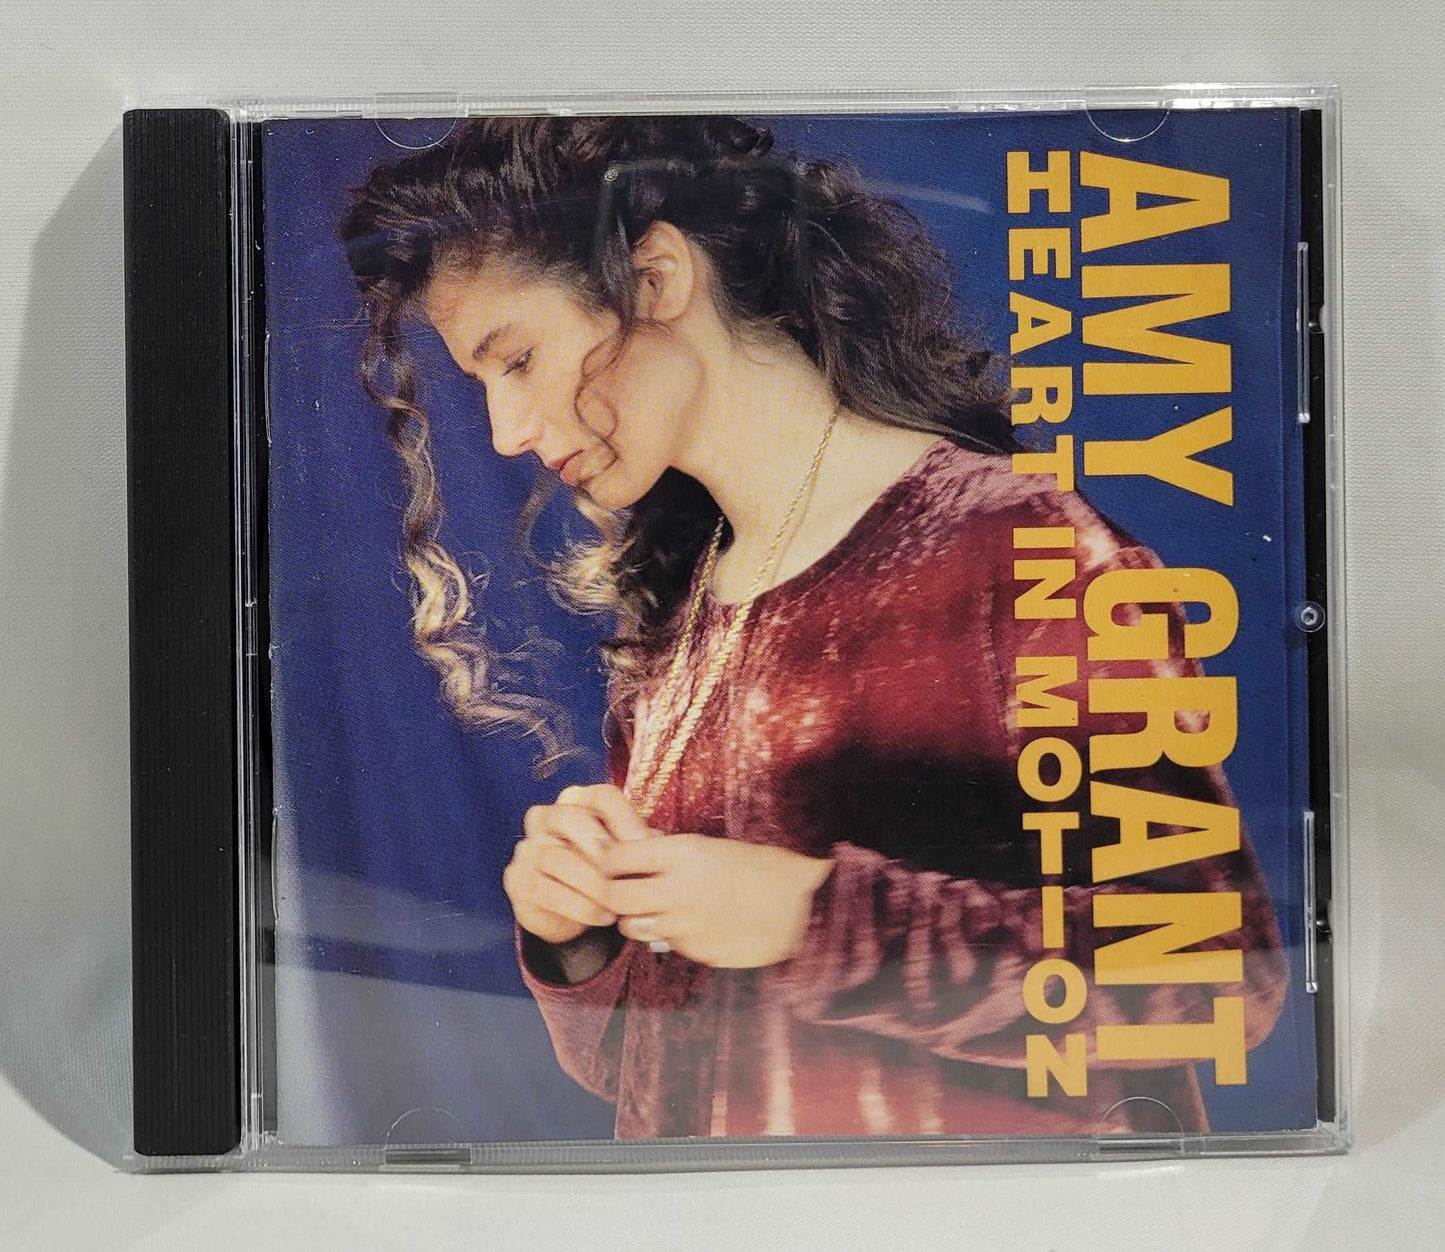 Amy Grant - Heart in Motion [1991 Club Edition] [Used CD]